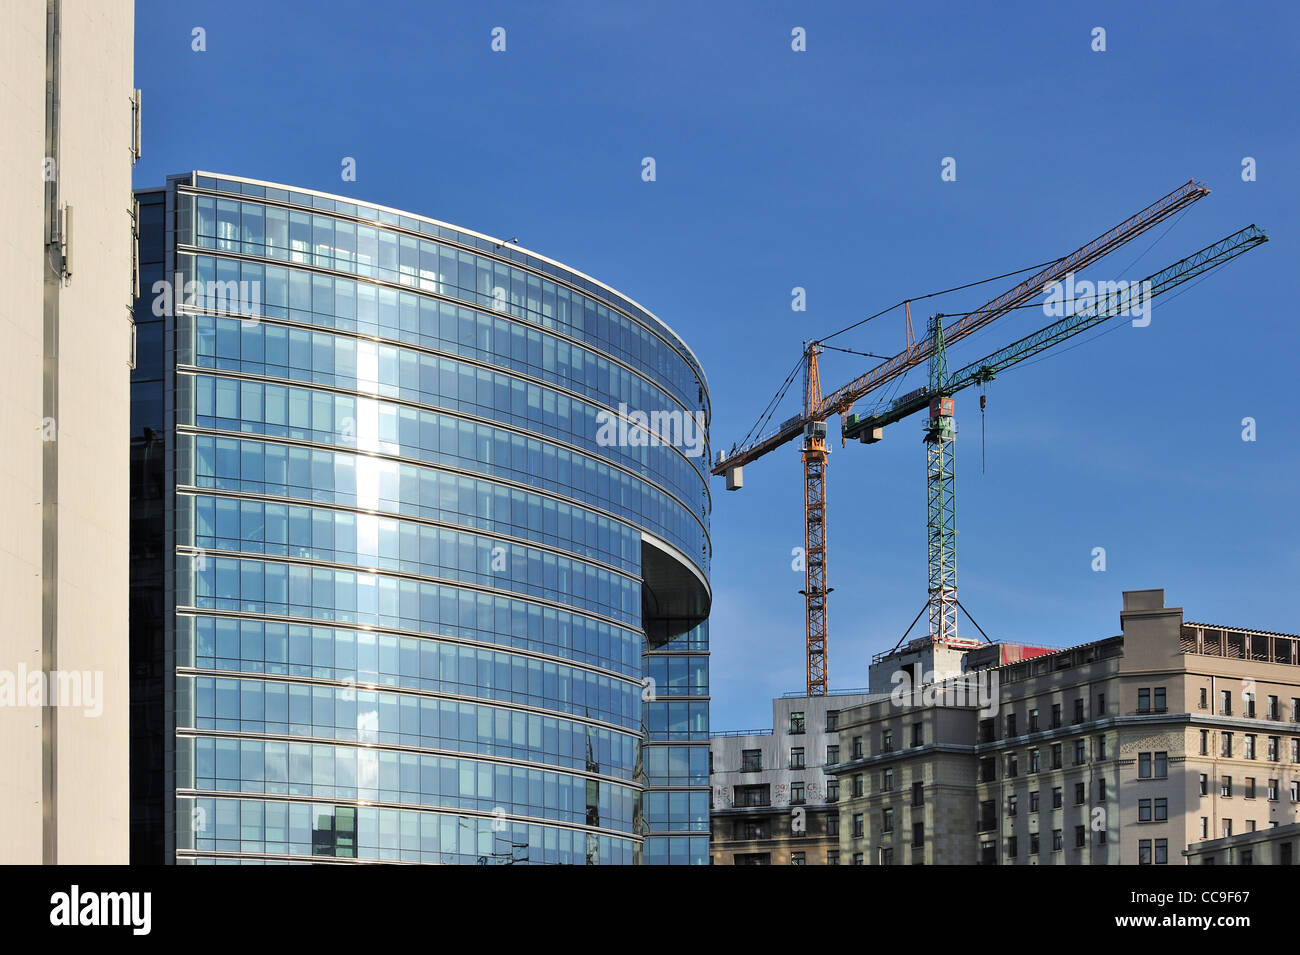 Building cranes and the Lex building, housing government offices of the Council of the European Union in Brussels, Belgium Stock Photo